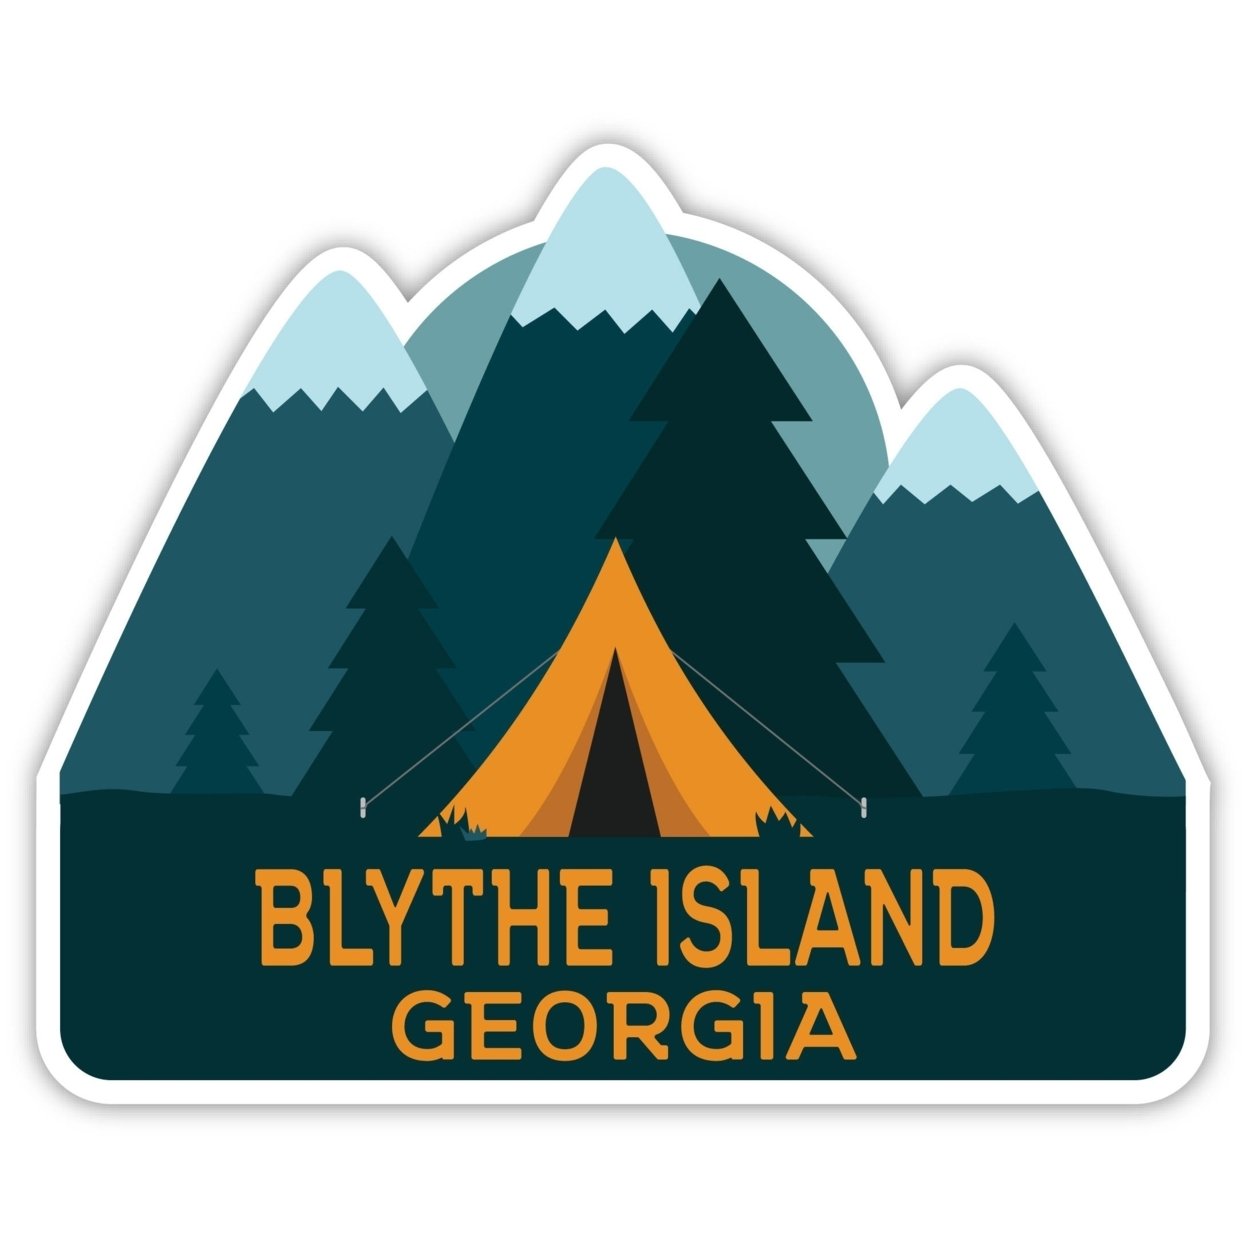 Blythe Island Georgia Souvenir Decorative Stickers (Choose Theme And Size) - 4-Pack, 8-Inch, Tent